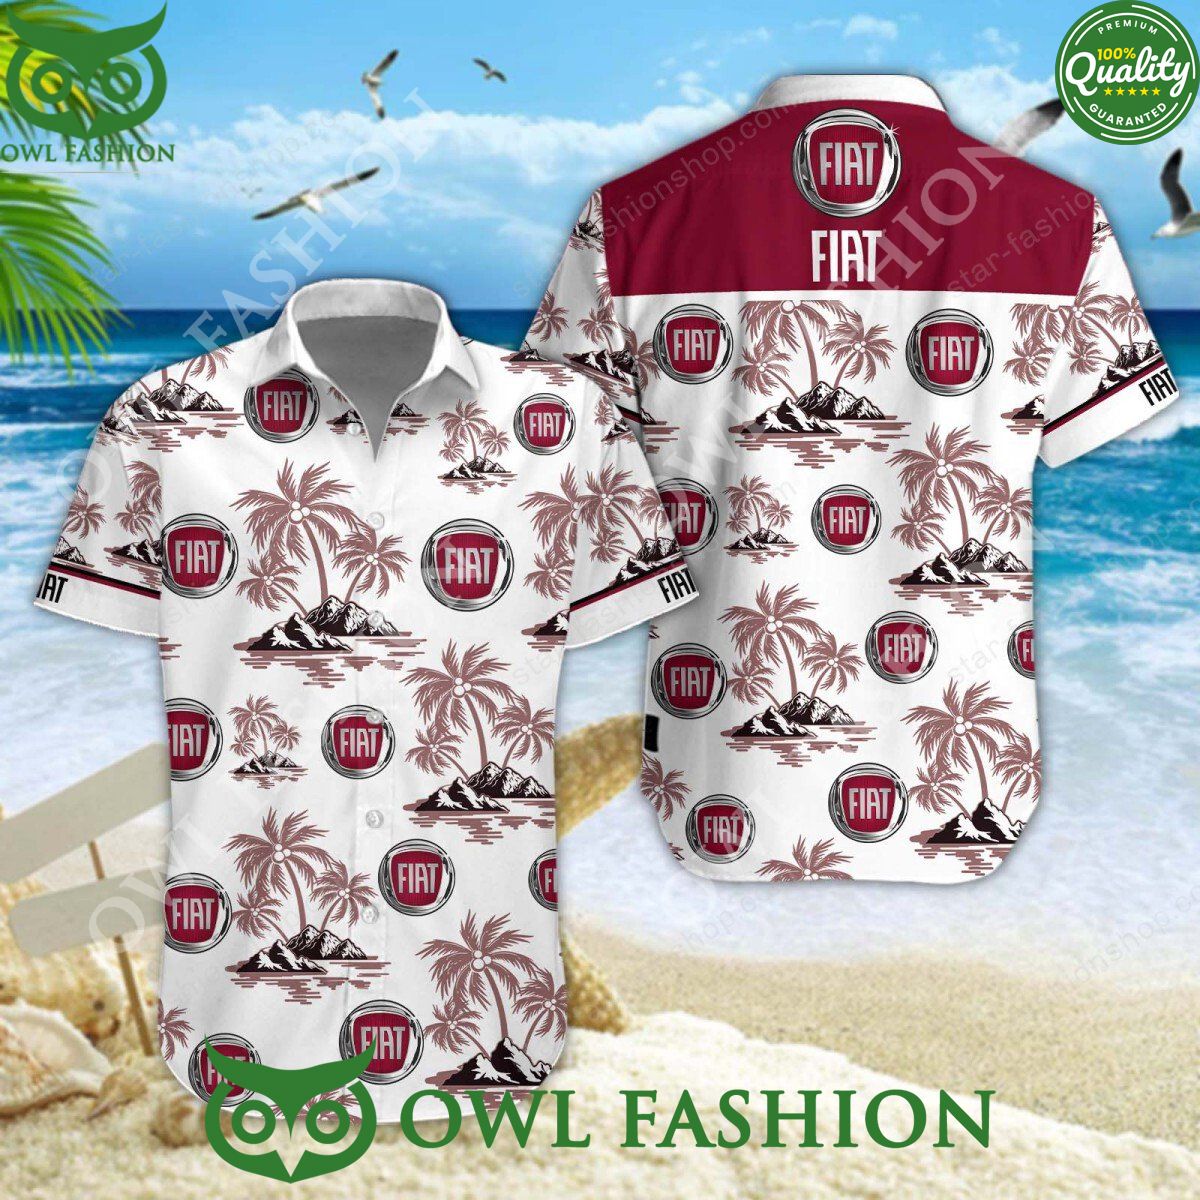 Fiat Italy Automobile Largest Hawaiian Shirt and Short